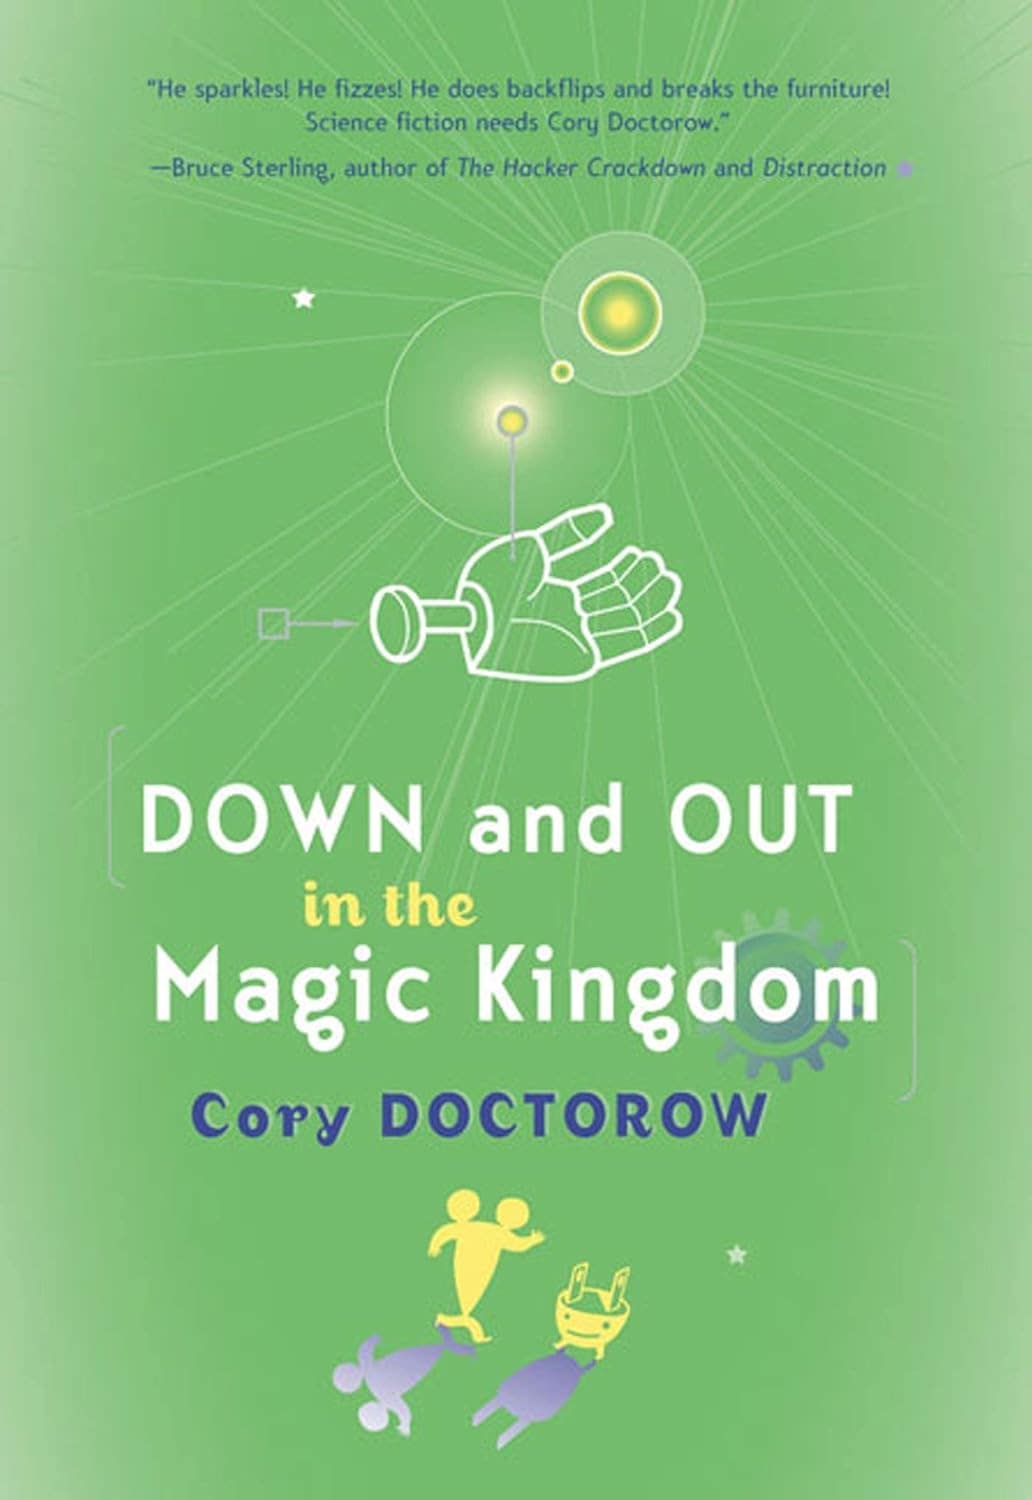 Down and Out in the Magic Kingdom by Cory Doctorow (2003)